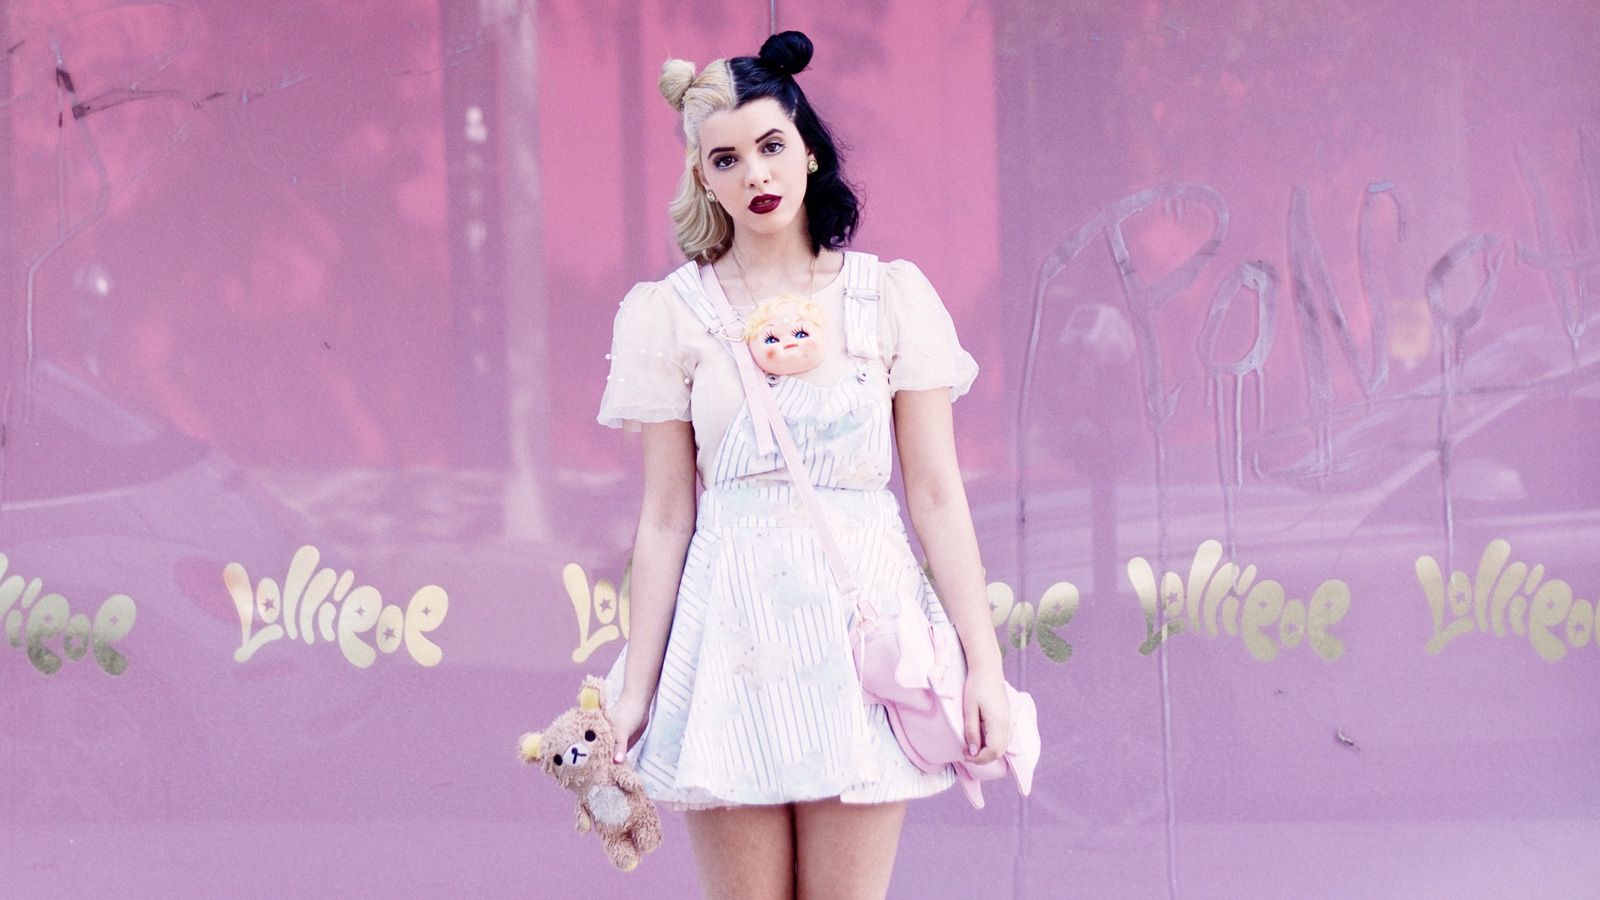 A woman in white dress and pink background - Melanie Martinez